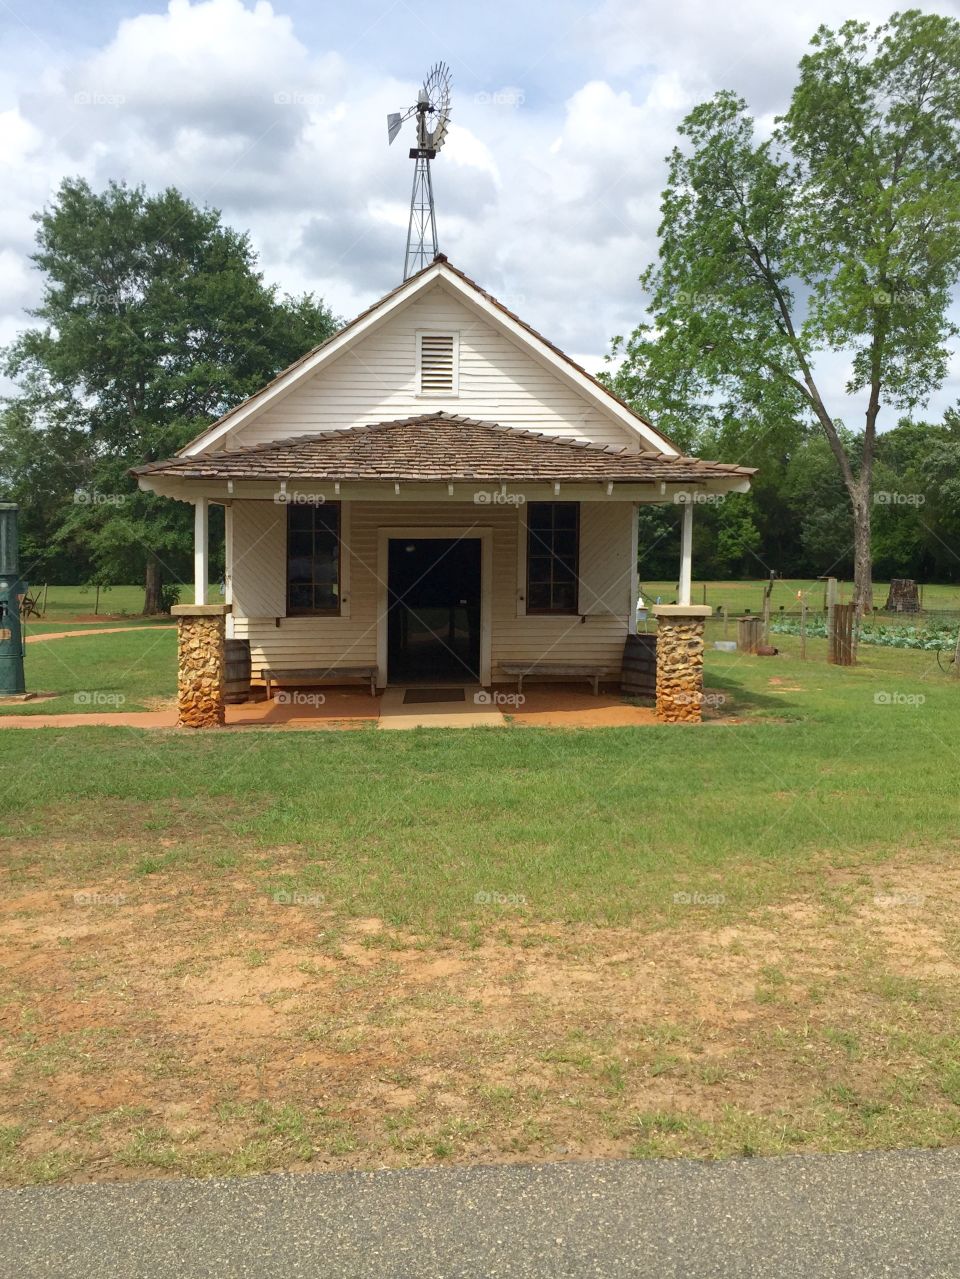 An old house at Farm of former President Carter in Georgia countryside.